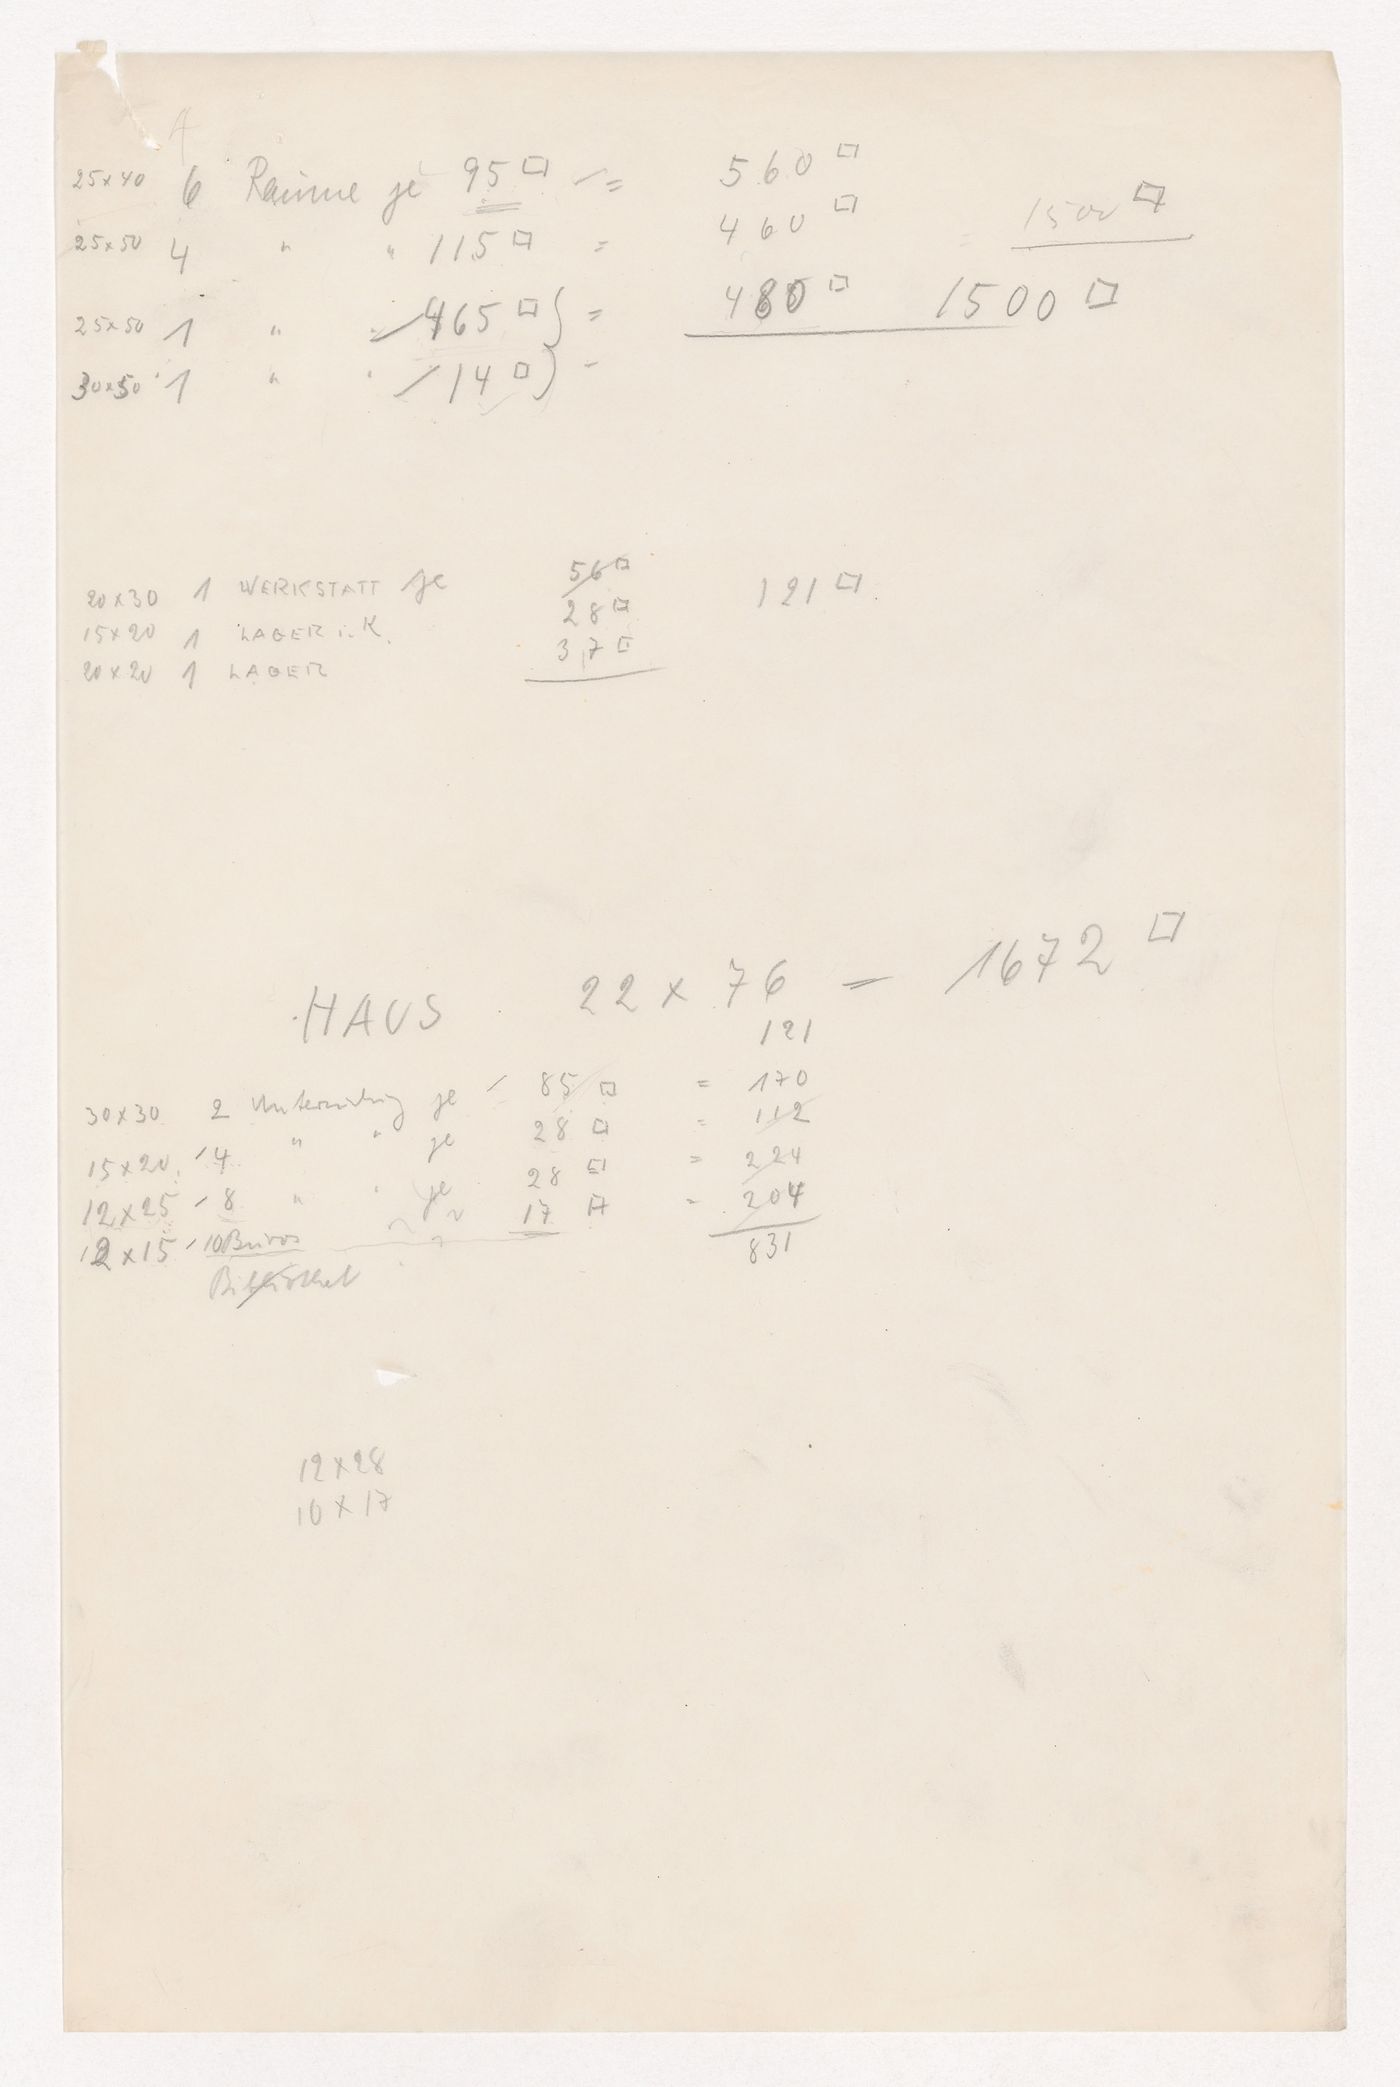 Notes and calculations for space requirements, probably for Illinois Institute of Technology